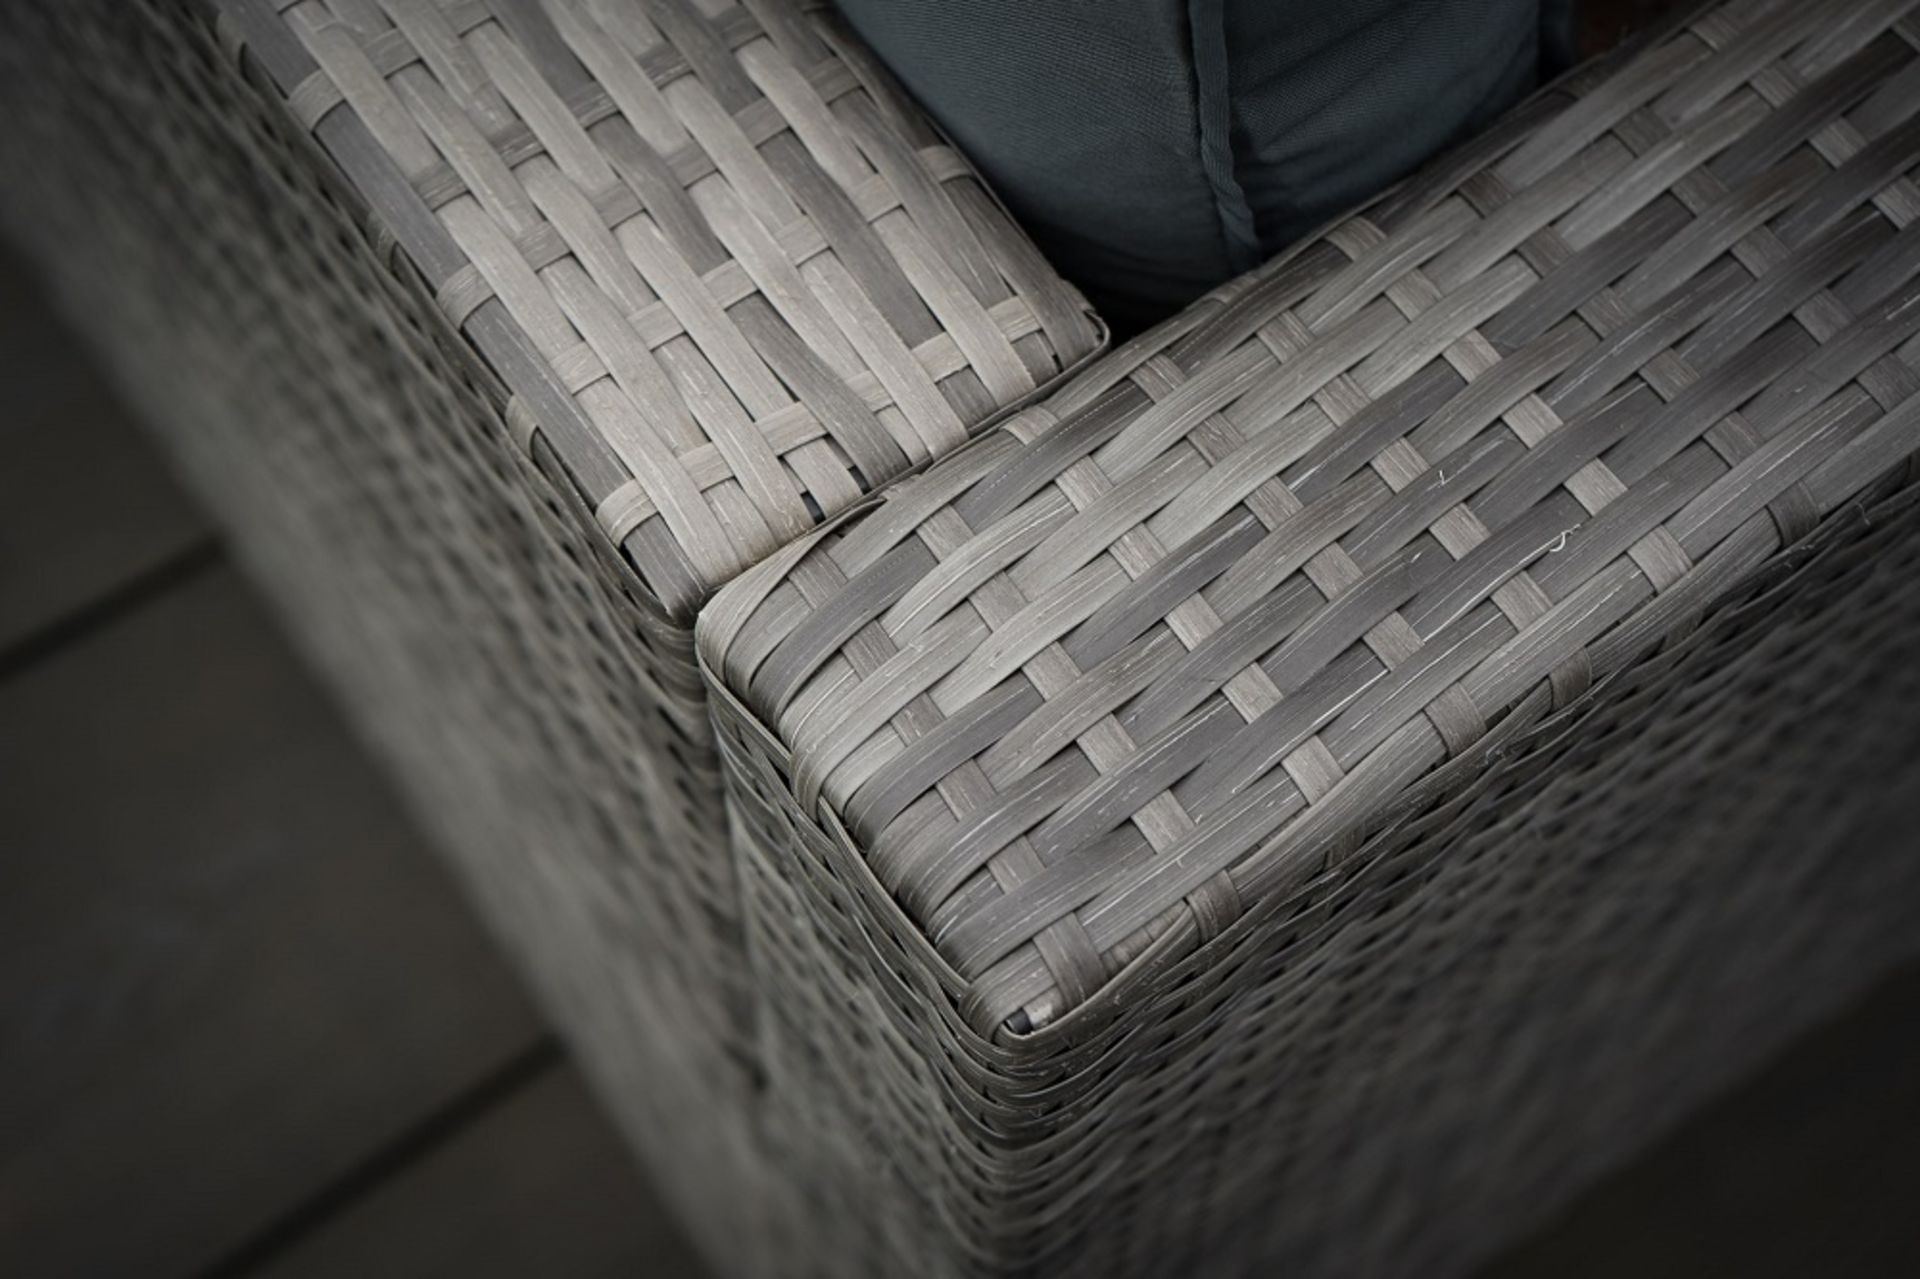 BRAND NEW Large 8 Seater Grey Rattan Furniture Set- RRP £914. Outdoor Patio Garden Furniture - Image 4 of 5